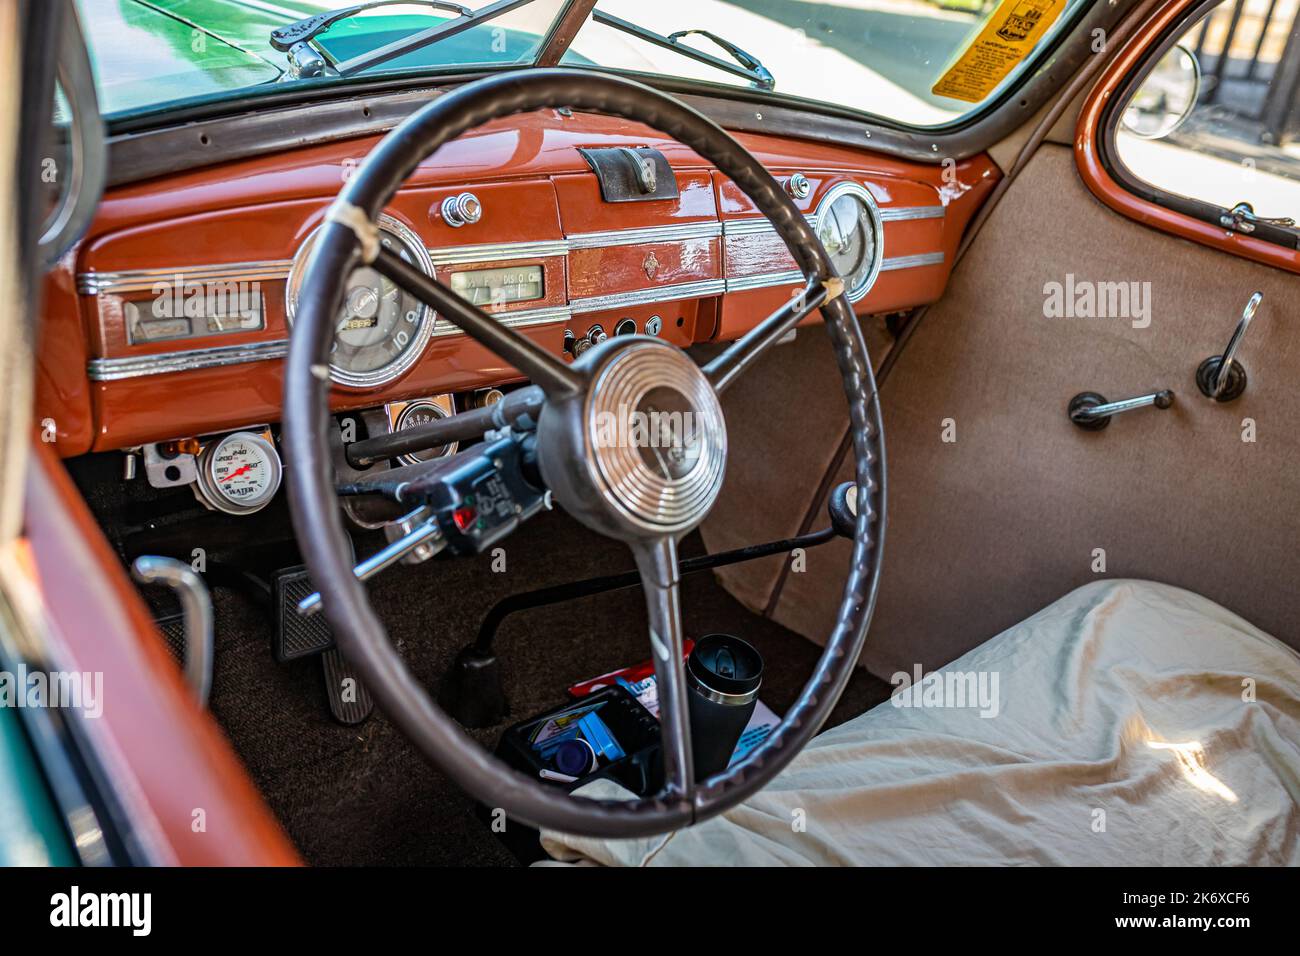 Falcon Heights, MN - June 19, 2022: High perspective detail interior view of a 1940 Packard 110 4 Door Sedan at a local car show. Stock Photo